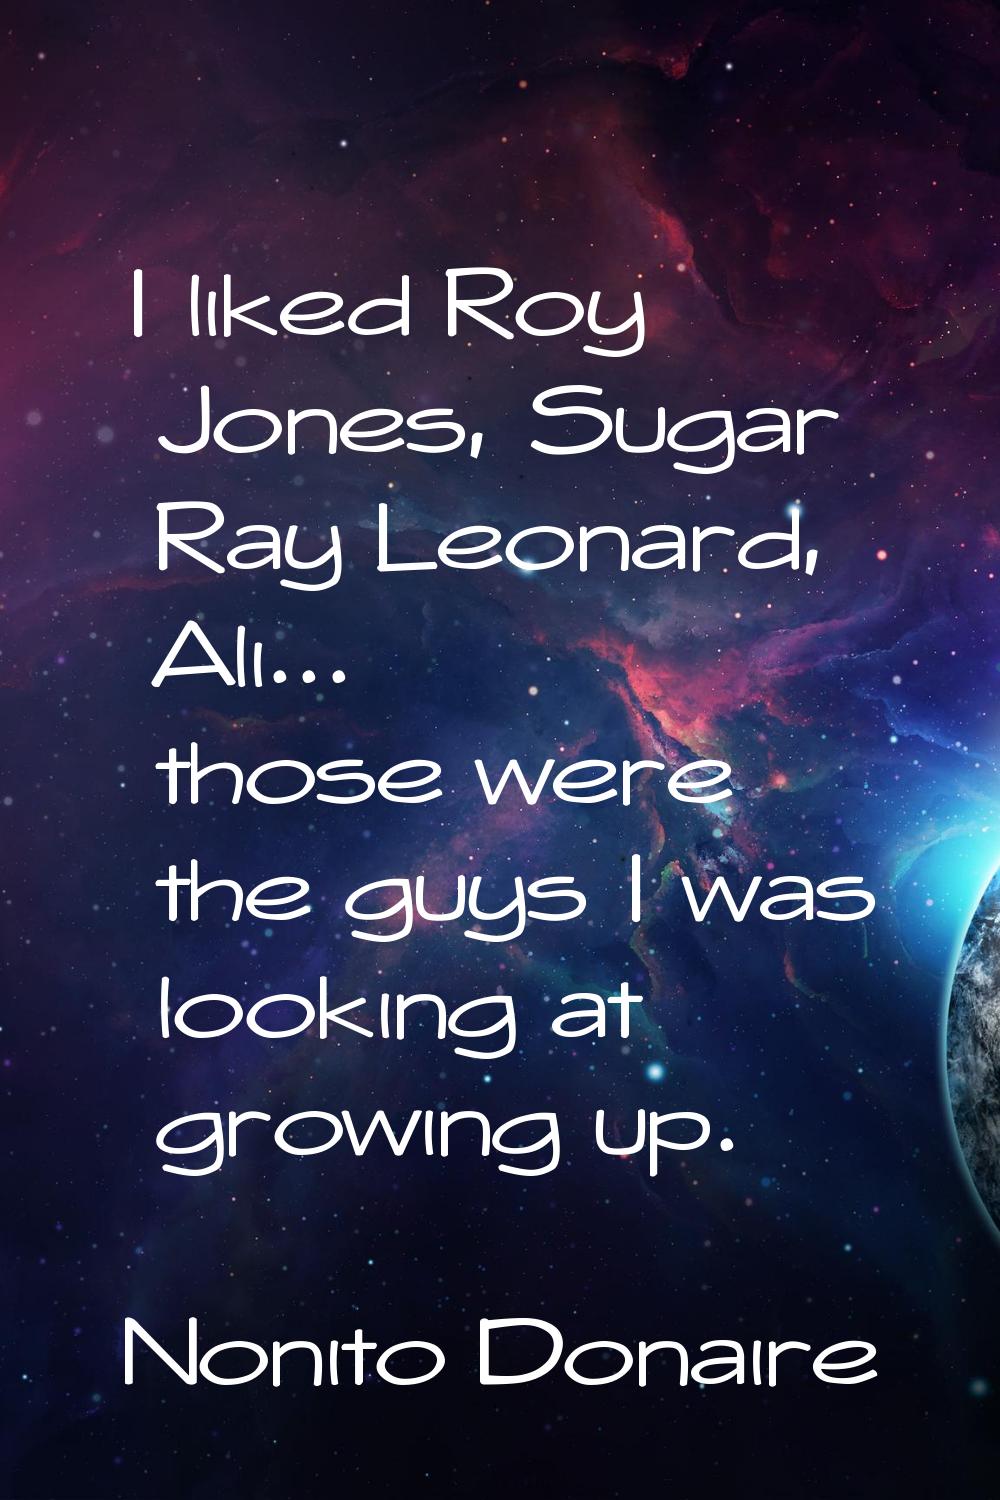 I liked Roy Jones, Sugar Ray Leonard, Ali... those were the guys I was looking at growing up.